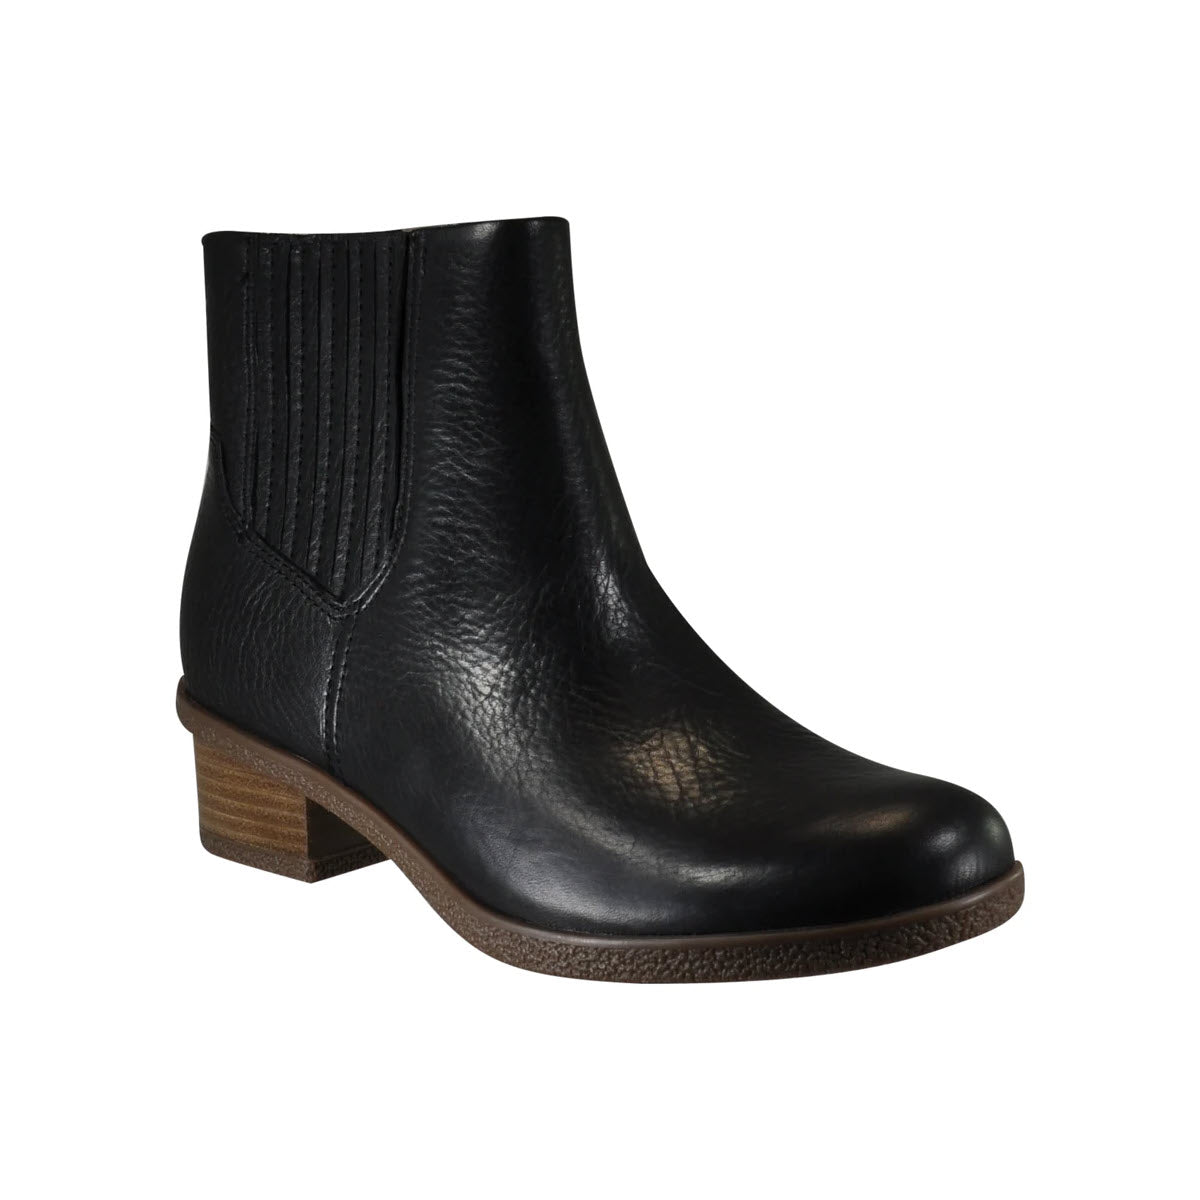 Dansko Daisie Black waterproof Chelsea boot with elastic side panels and a low, stacked heel on a white background.